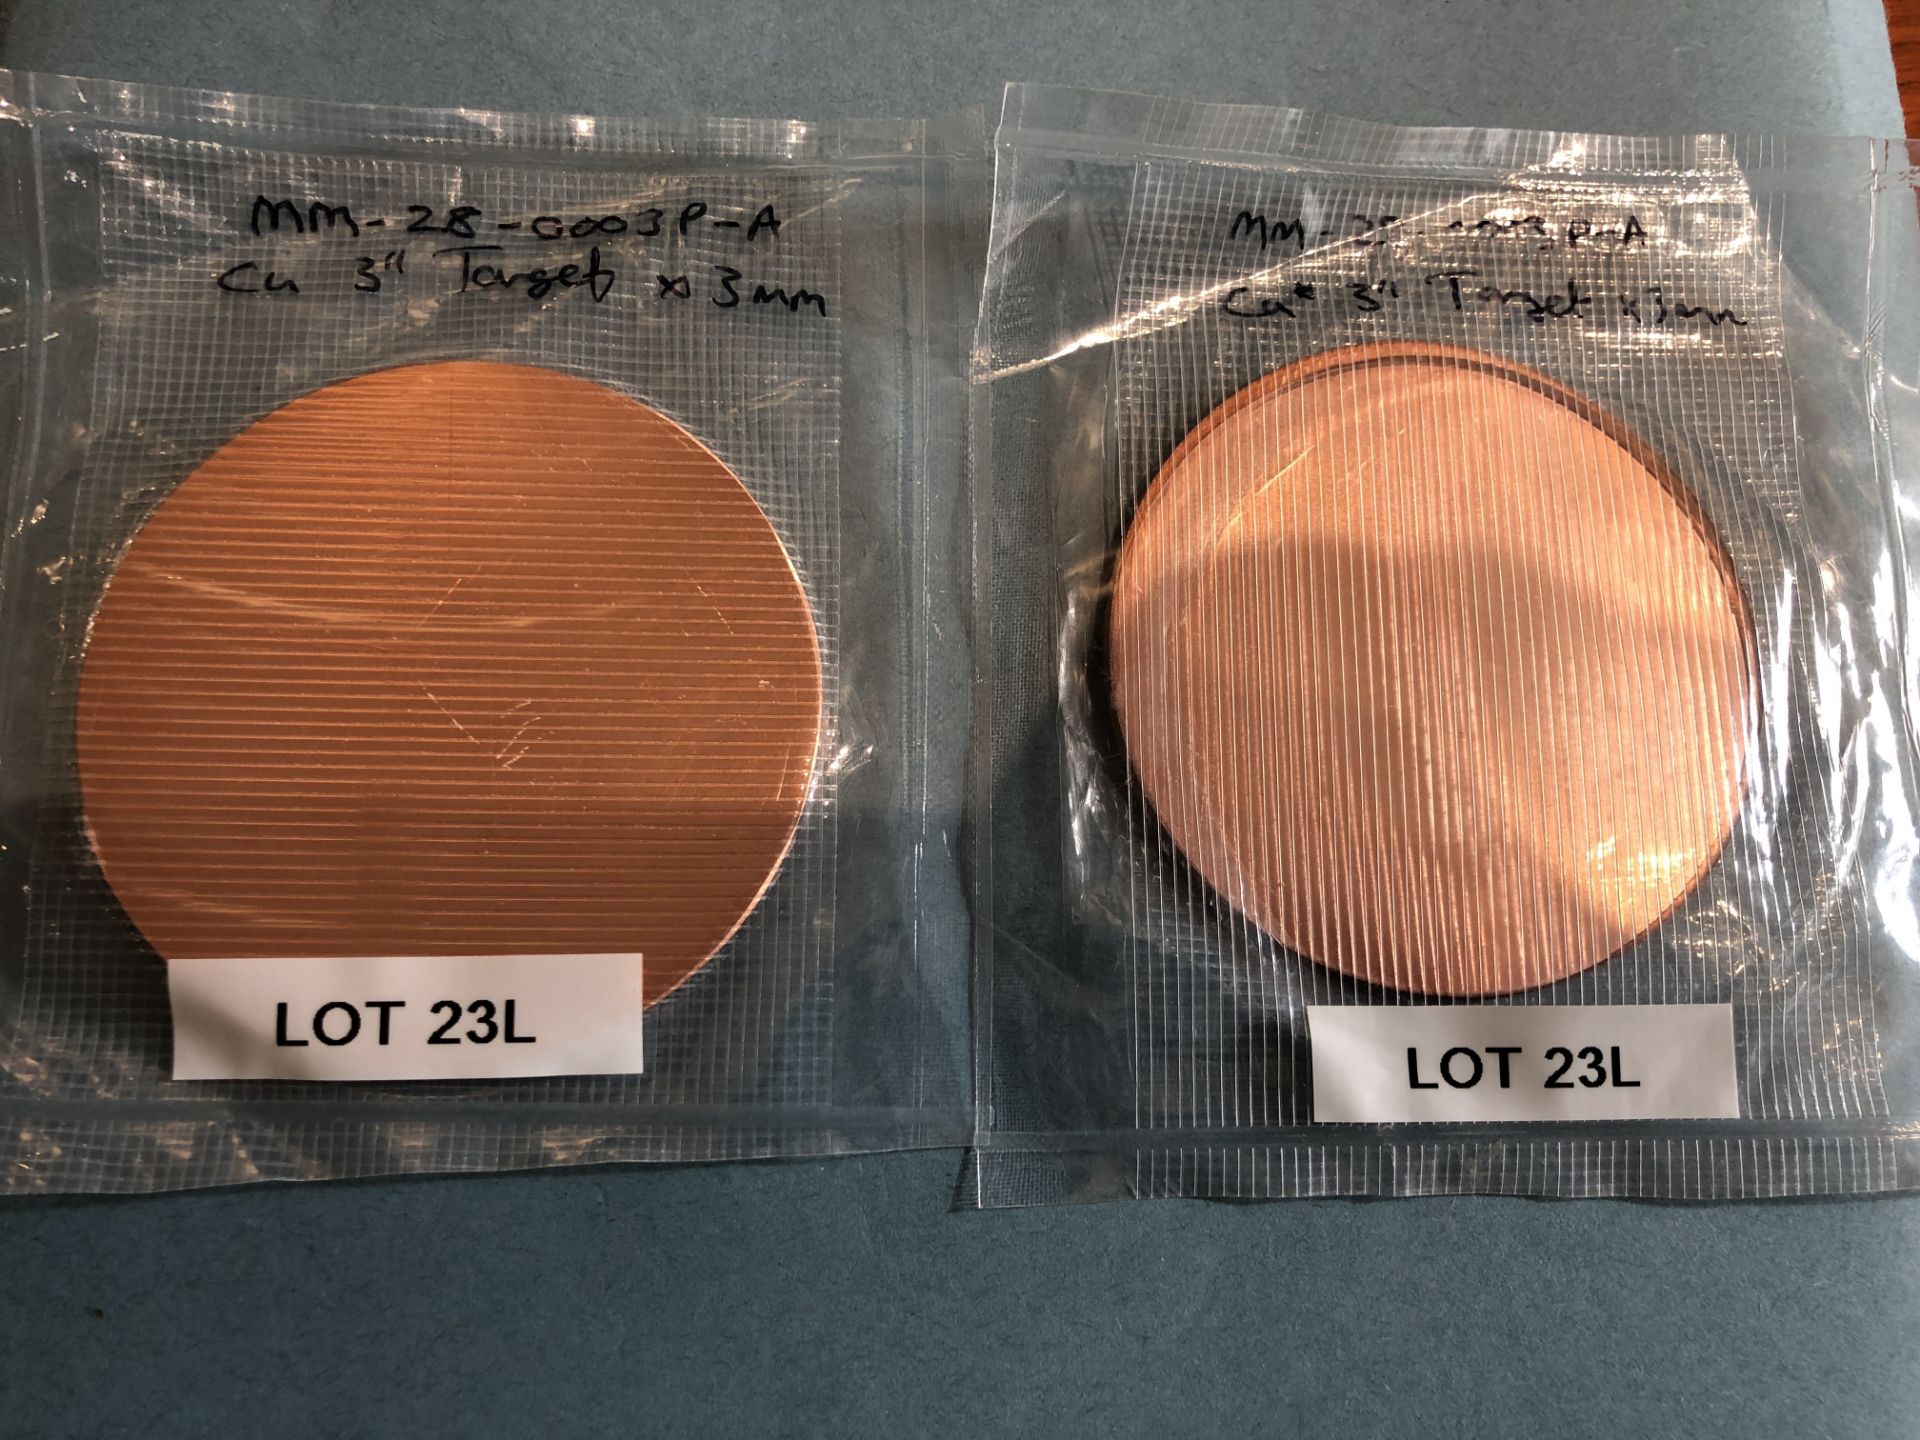 2: Copper Sputtering Targets - Purity 99.99% 3" Diameter x 3mm Thick I New Target - Weight 100g 1